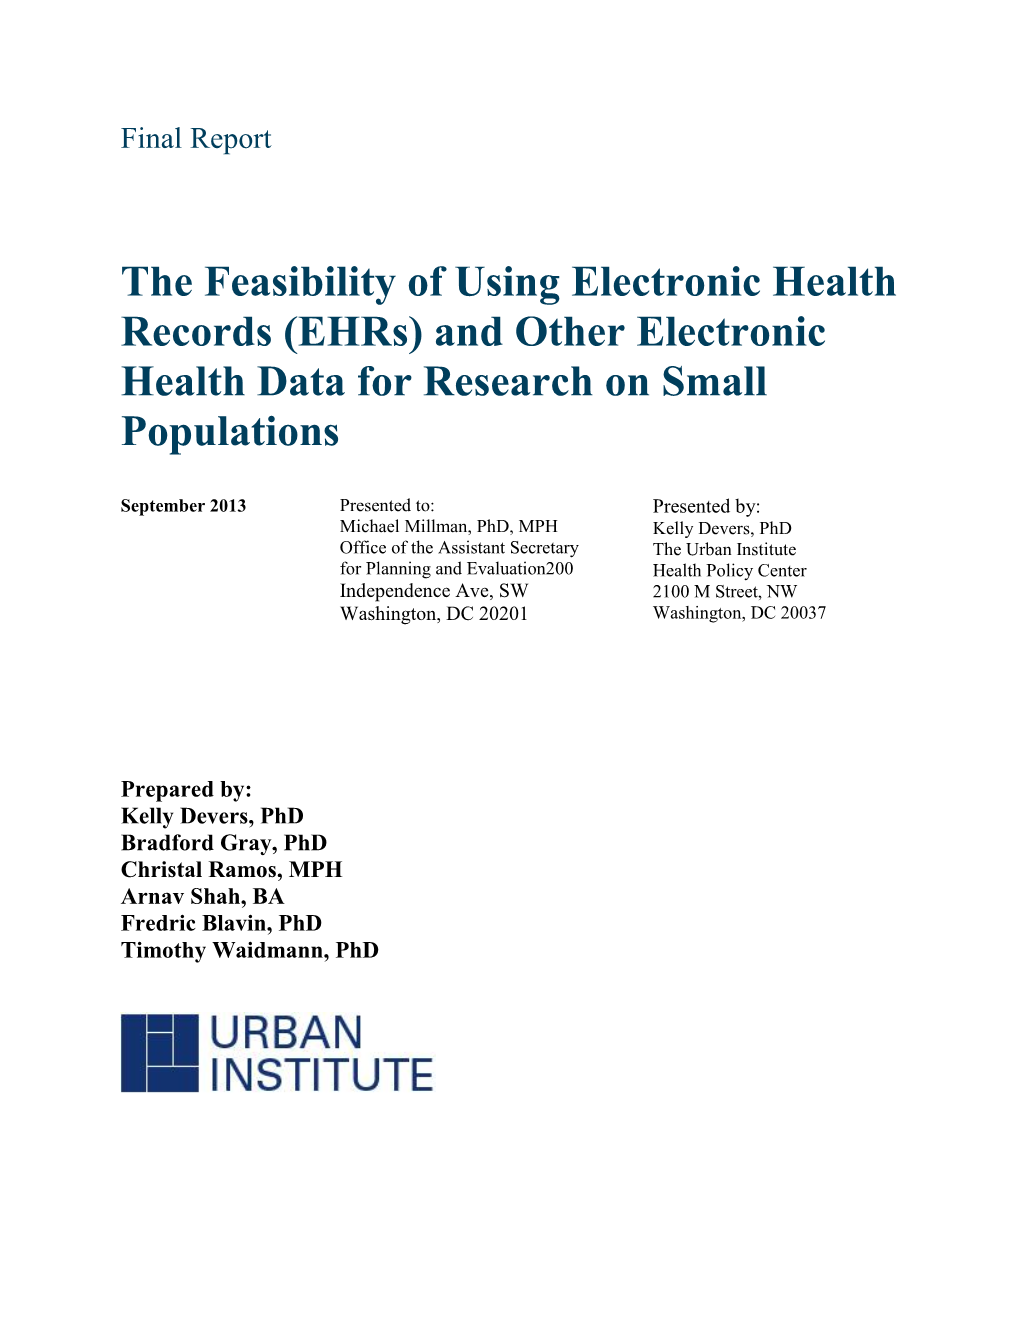 The Feasibility of Using Electronic Health Data for Research on Small